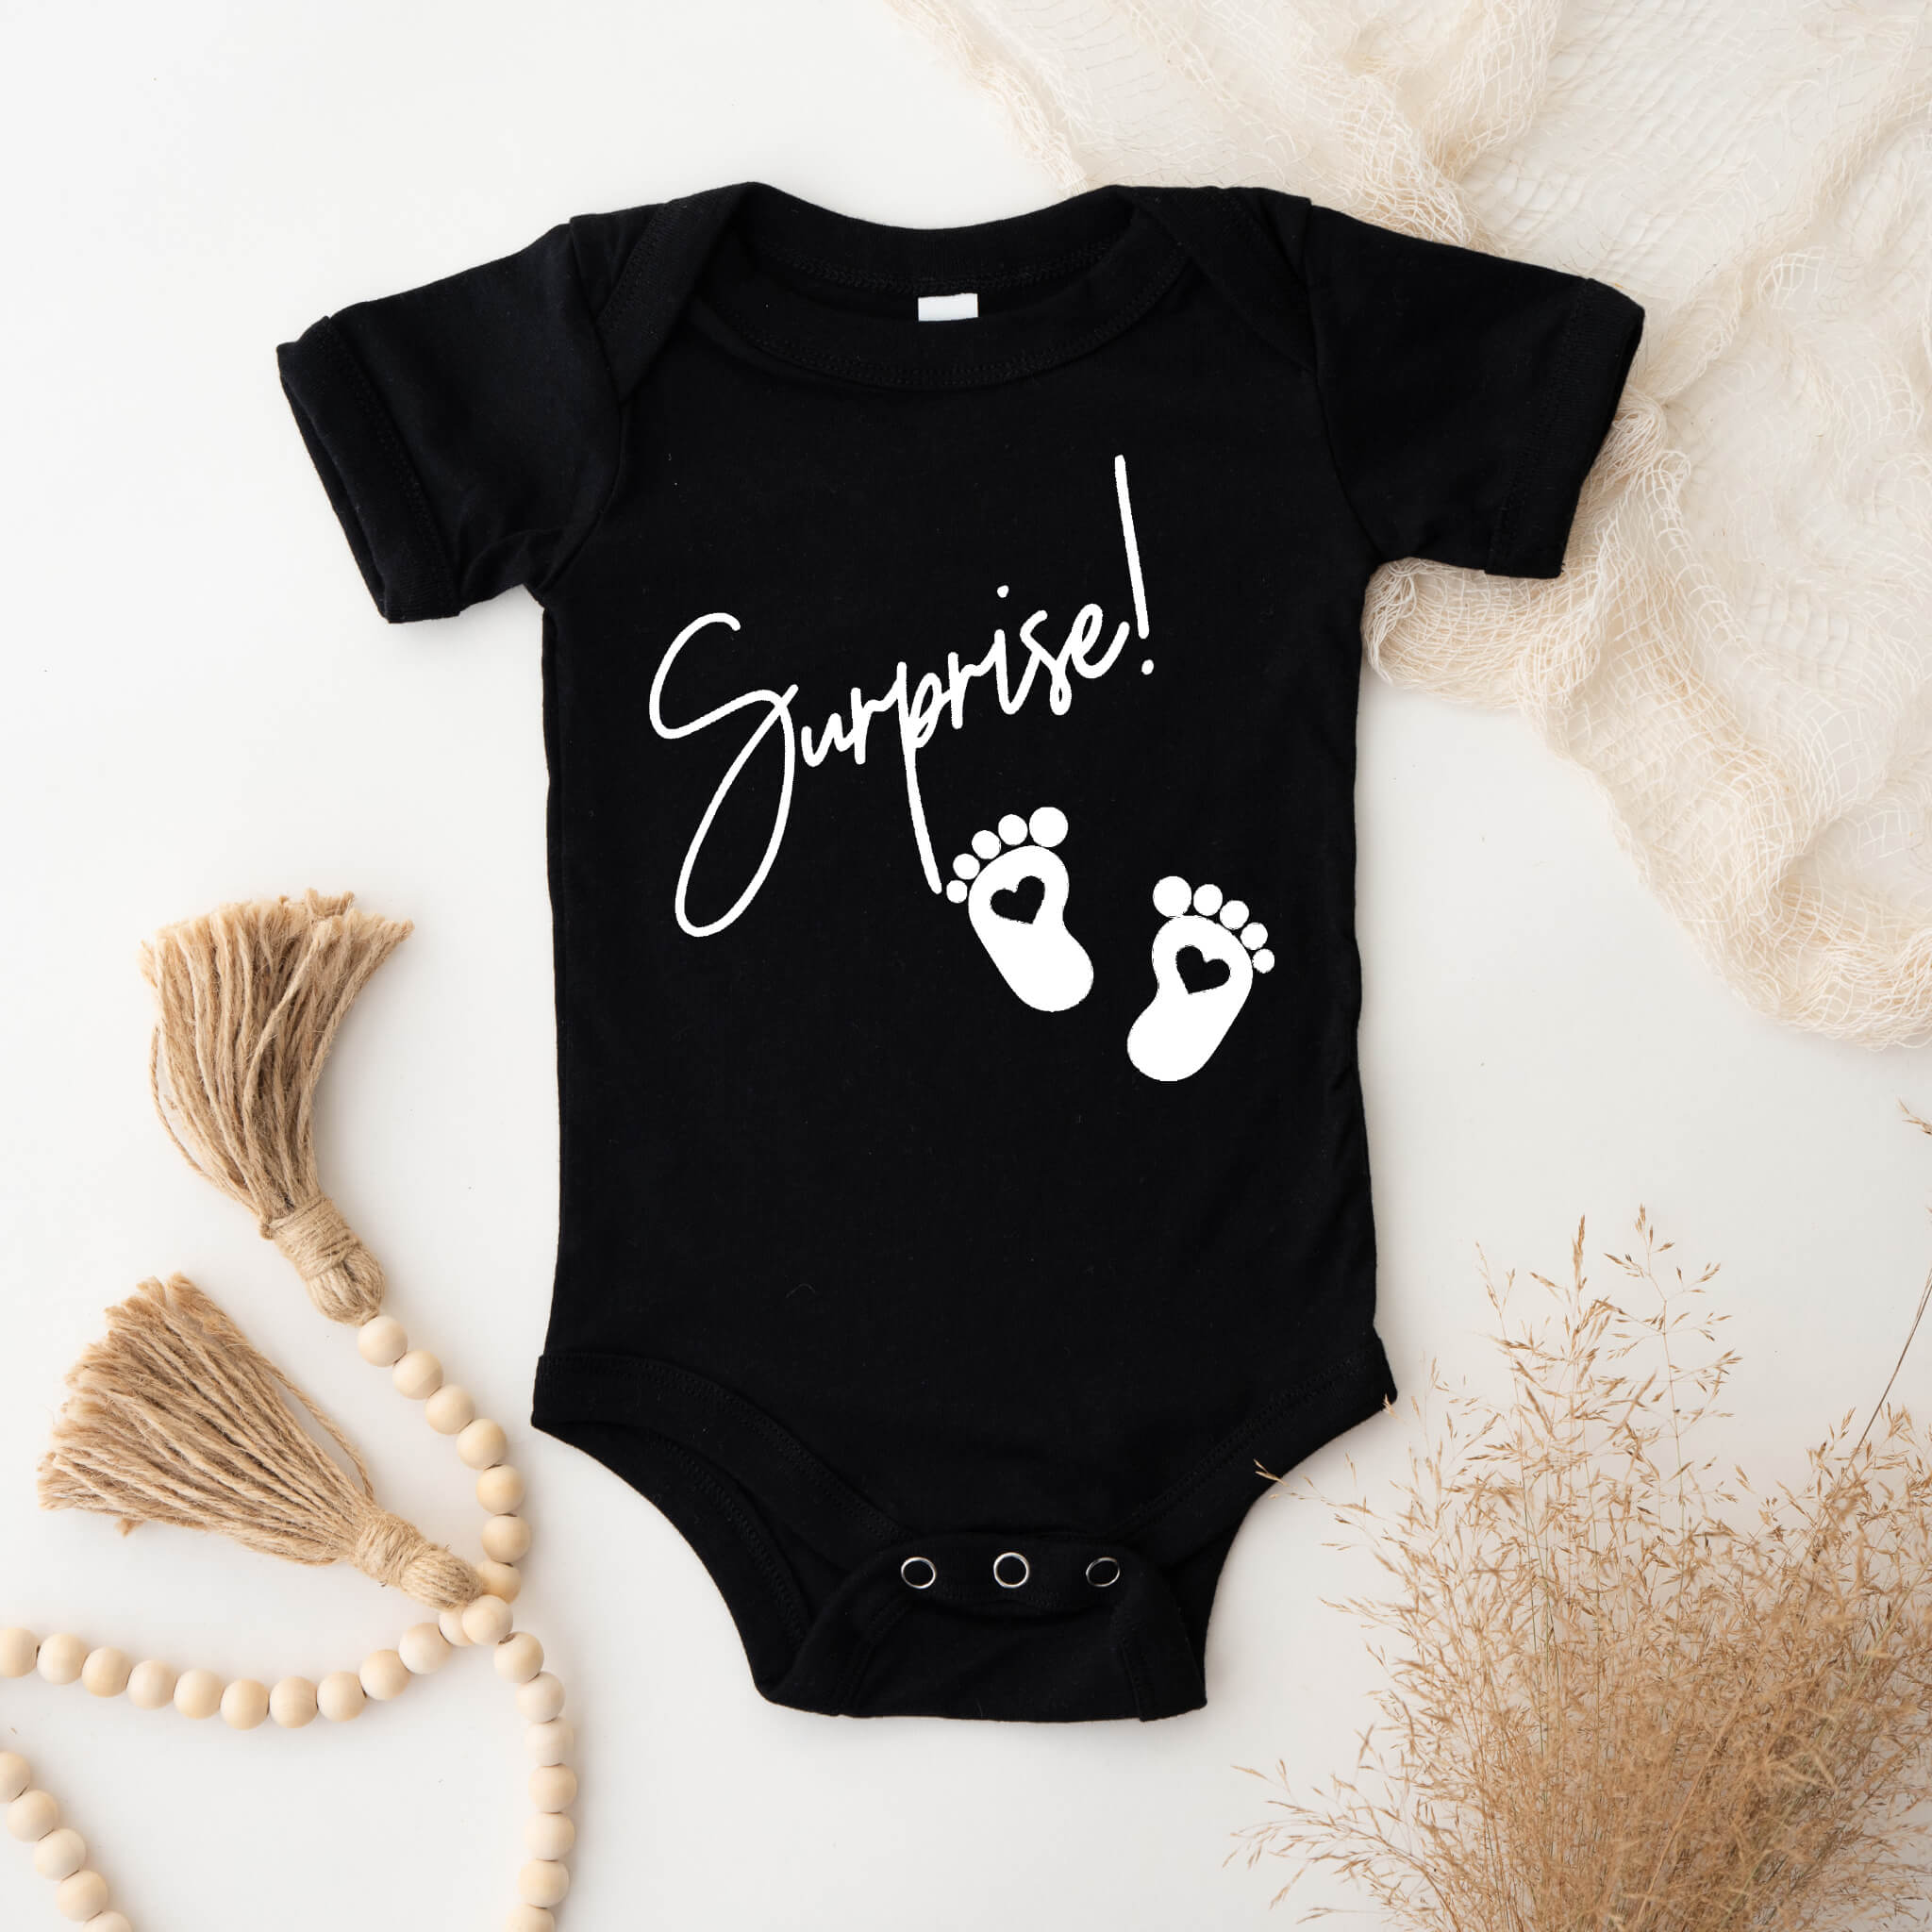 Baby Bodysuit Pregnancy Announcement, Birth Announcement hello GRANDMA and  PAPY Get Ready, I'll Be Coming Soon -  Canada